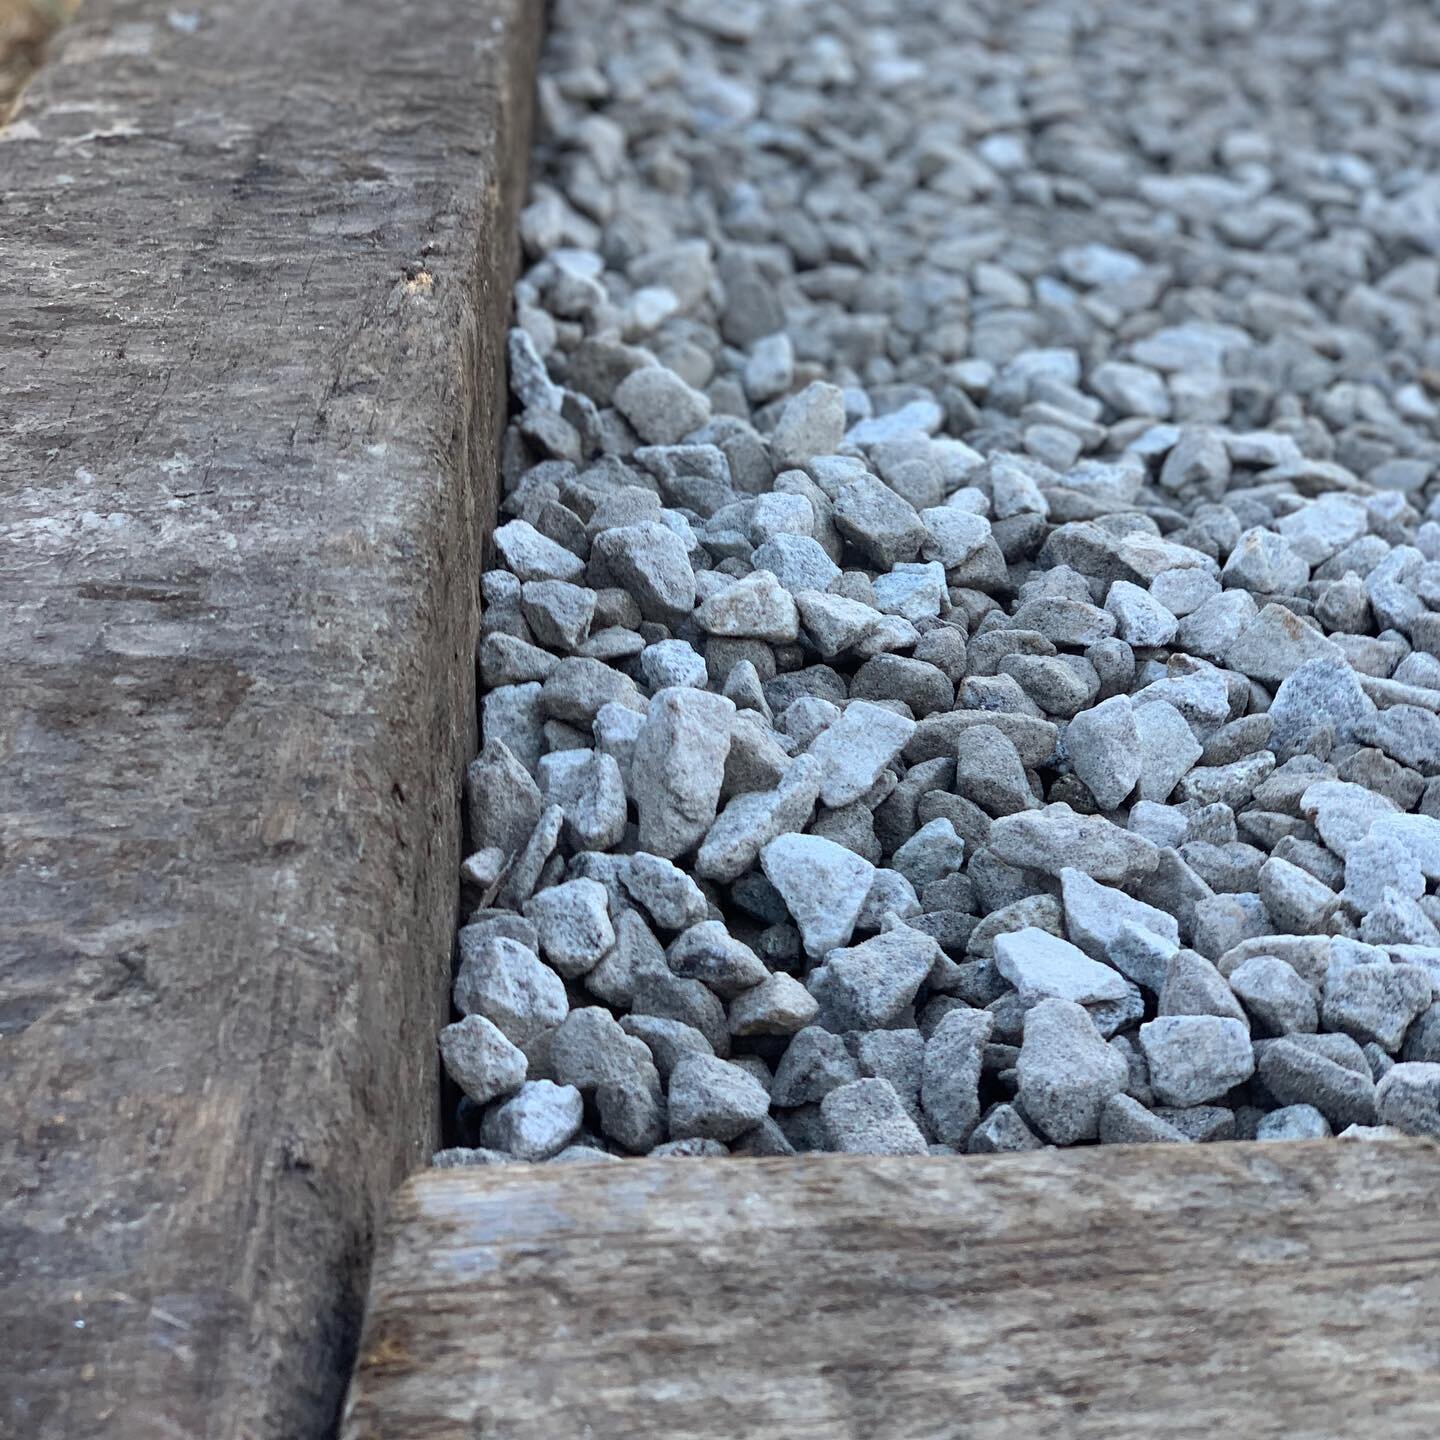 GRAVEL DRIVEWAY:

We installed this gravel parking pad for a client who needed extra parking behind their property